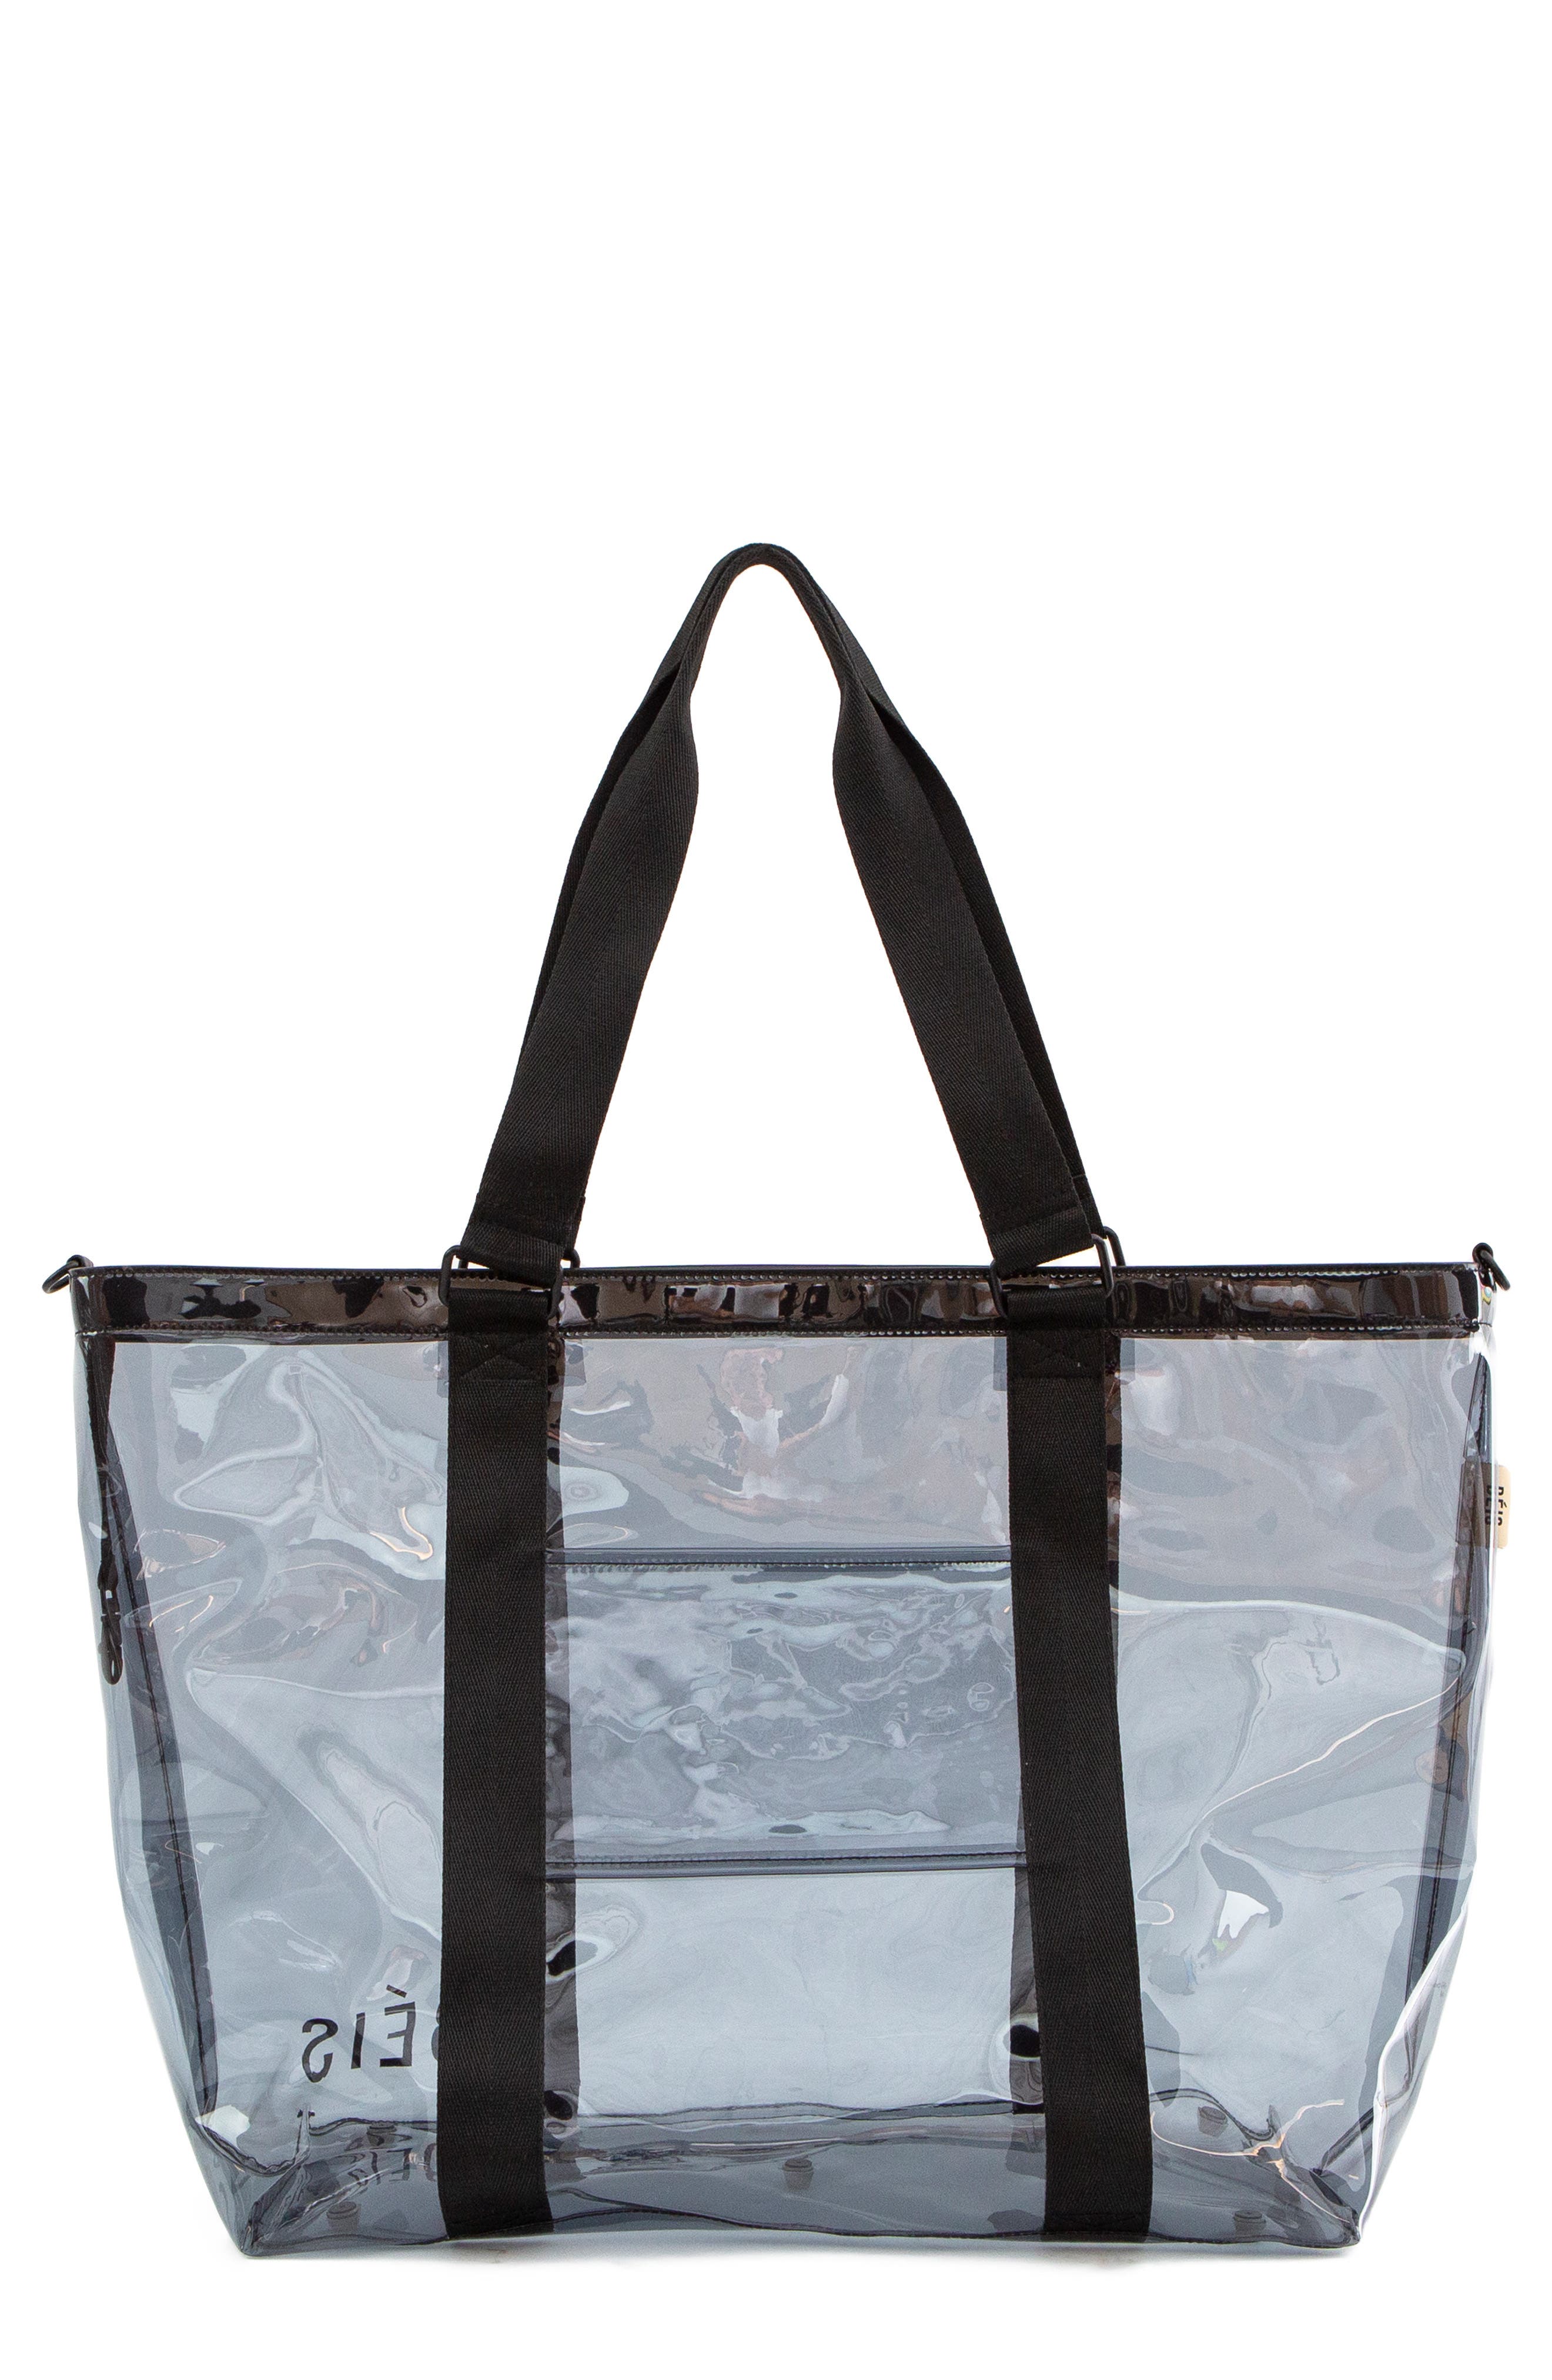 packable beach tote